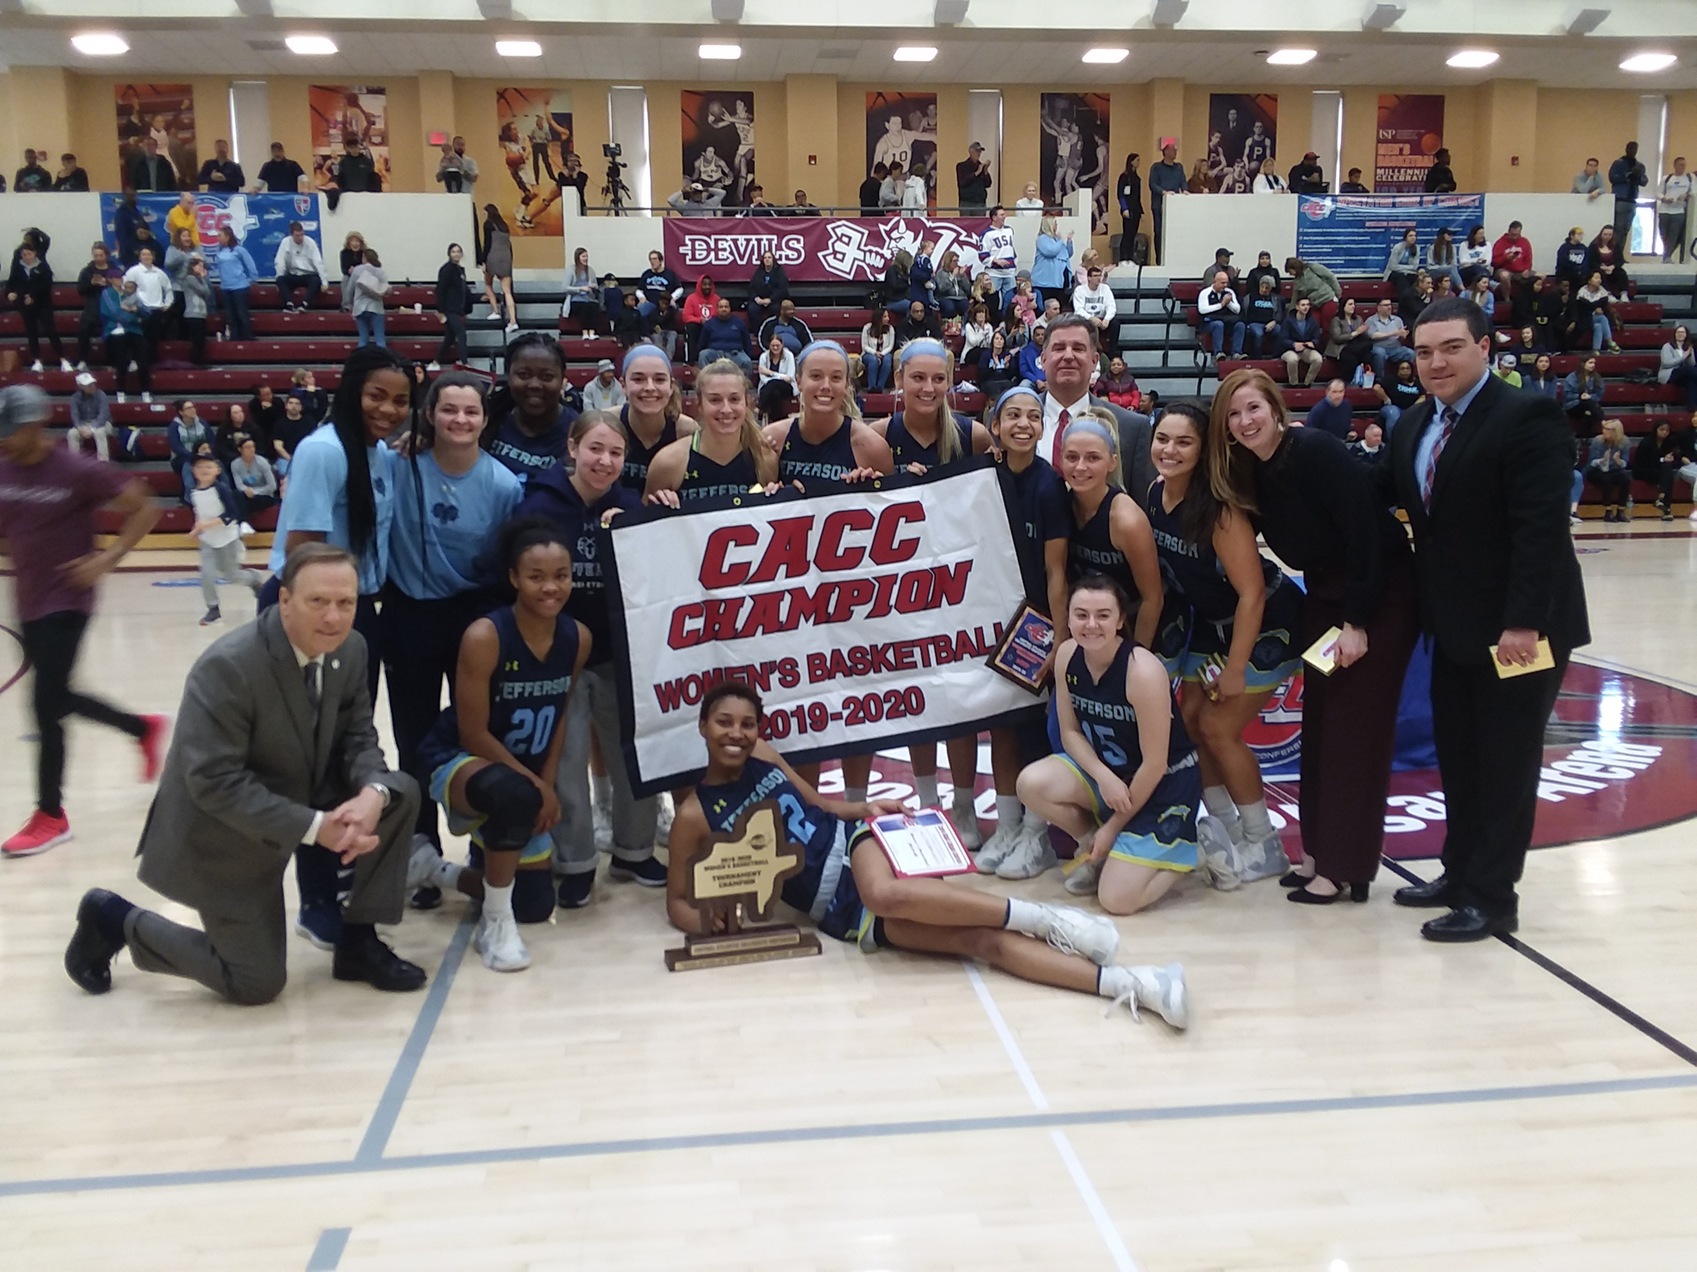 TWO IN A ROW: Jefferson Downs HFU for Second-Straight CACC WBB Championship